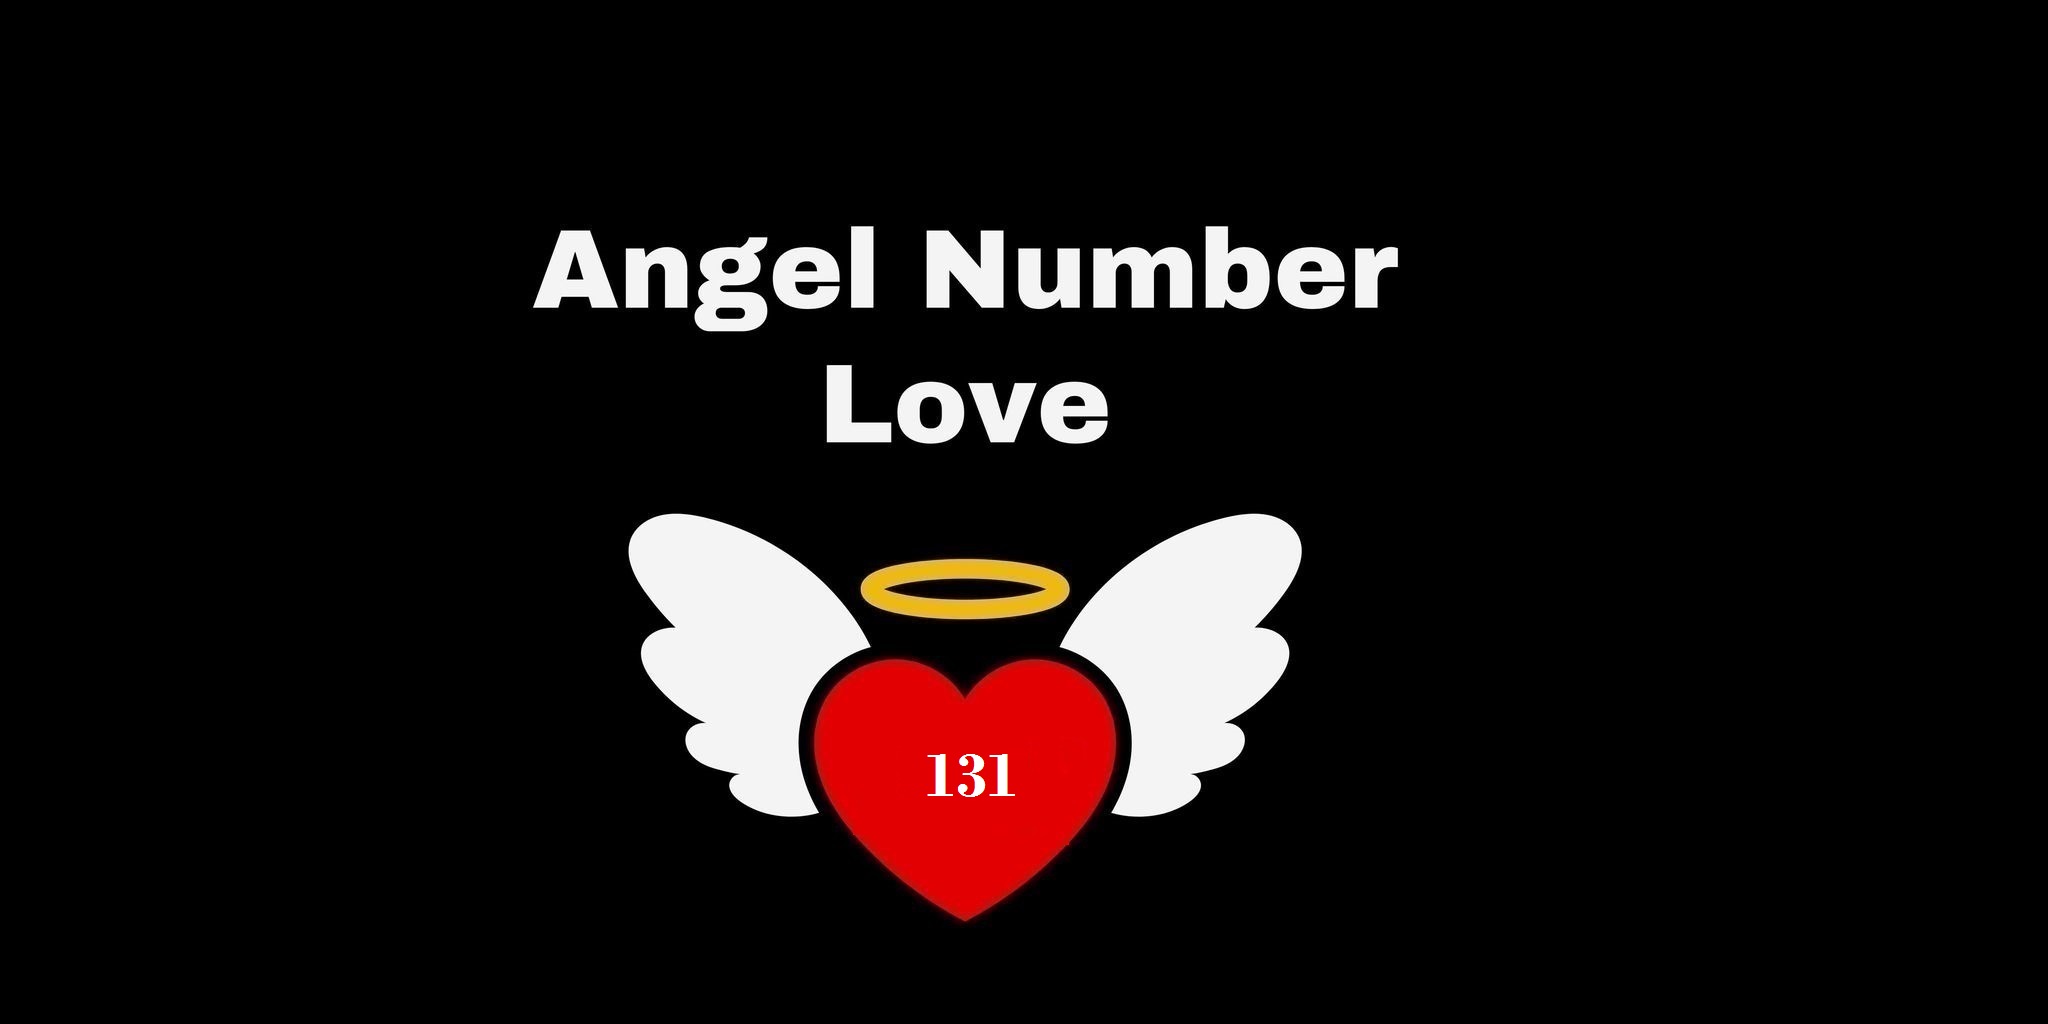 131 Angel Number Meaning In Love